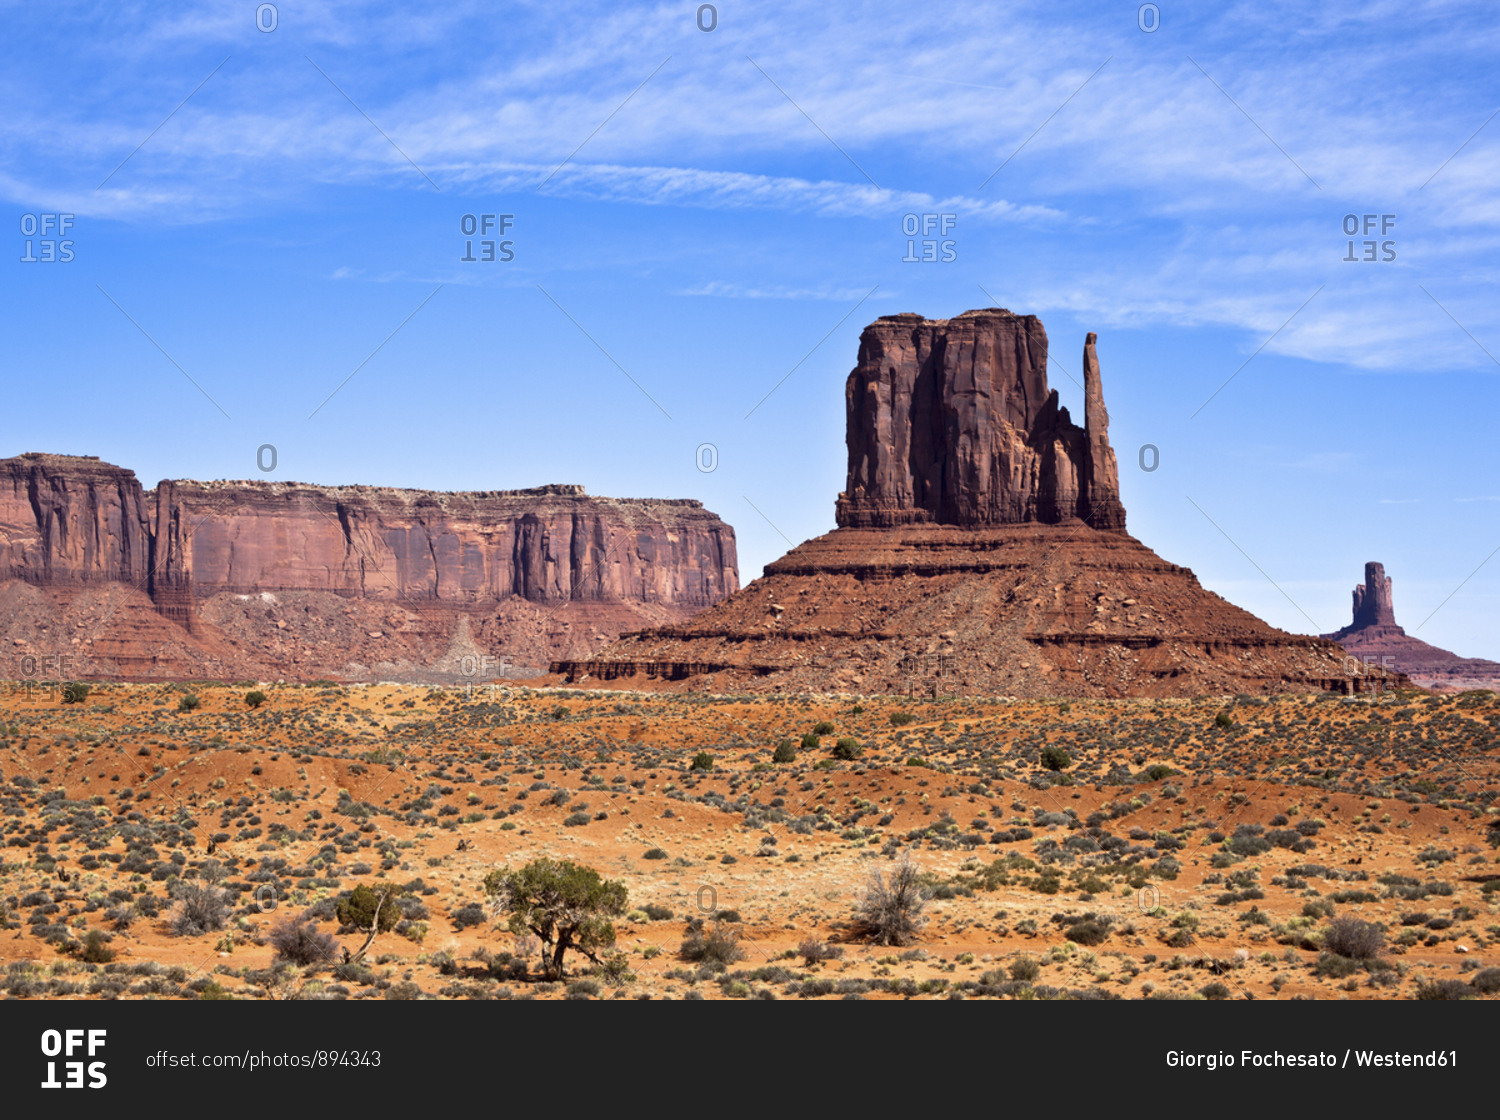 USA- Arizona- Mittens butte in Monument Valley